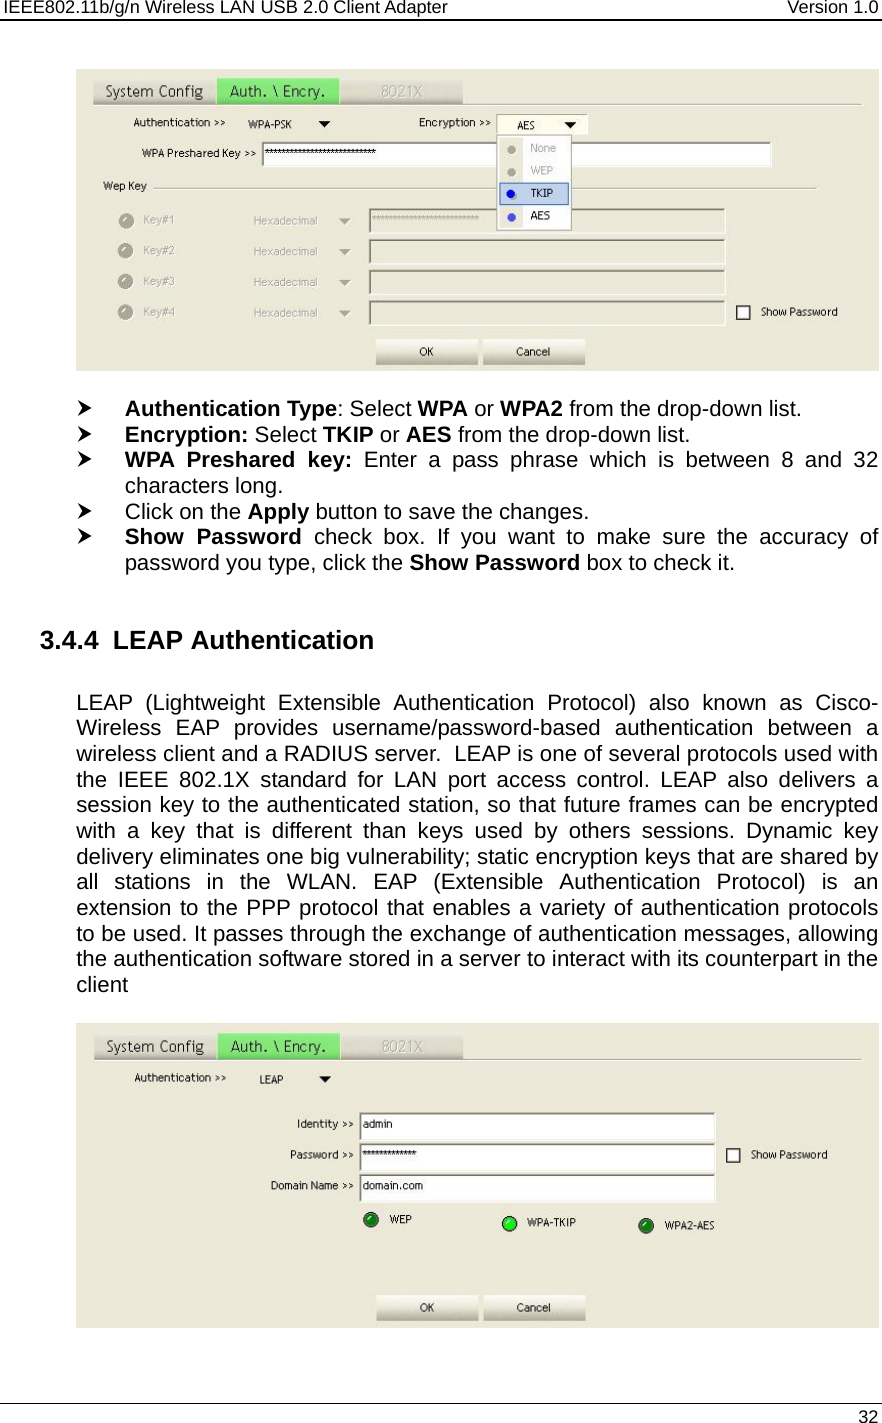 IEEE802.11b/g/n Wireless LAN USB 2.0 Client Adapter  Version 1.0   32    h Authentication Type: Select WPA or WPA2 from the drop-down list.  h Encryption: Select TKIP or AES from the drop-down list.  h WPA Preshared key: Enter a pass phrase which is between 8 and 32 characters long.  h Click on the Apply button to save the changes.  h Show Password check box. If you want to make sure the accuracy of password you type, click the Show Password box to check it.  3.4.4  LEAP Authentication   LEAP (Lightweight Extensible Authentication Protocol) also known as Cisco-Wireless EAP provides username/password-based authentication between a wireless client and a RADIUS server.  LEAP is one of several protocols used with the IEEE 802.1X standard for LAN port access control. LEAP also delivers a session key to the authenticated station, so that future frames can be encrypted with a key that is different than keys used by others sessions. Dynamic key delivery eliminates one big vulnerability; static encryption keys that are shared by all stations in the WLAN. EAP (Extensible Authentication Protocol) is an extension to the PPP protocol that enables a variety of authentication protocols to be used. It passes through the exchange of authentication messages, allowing the authentication software stored in a server to interact with its counterpart in the client     